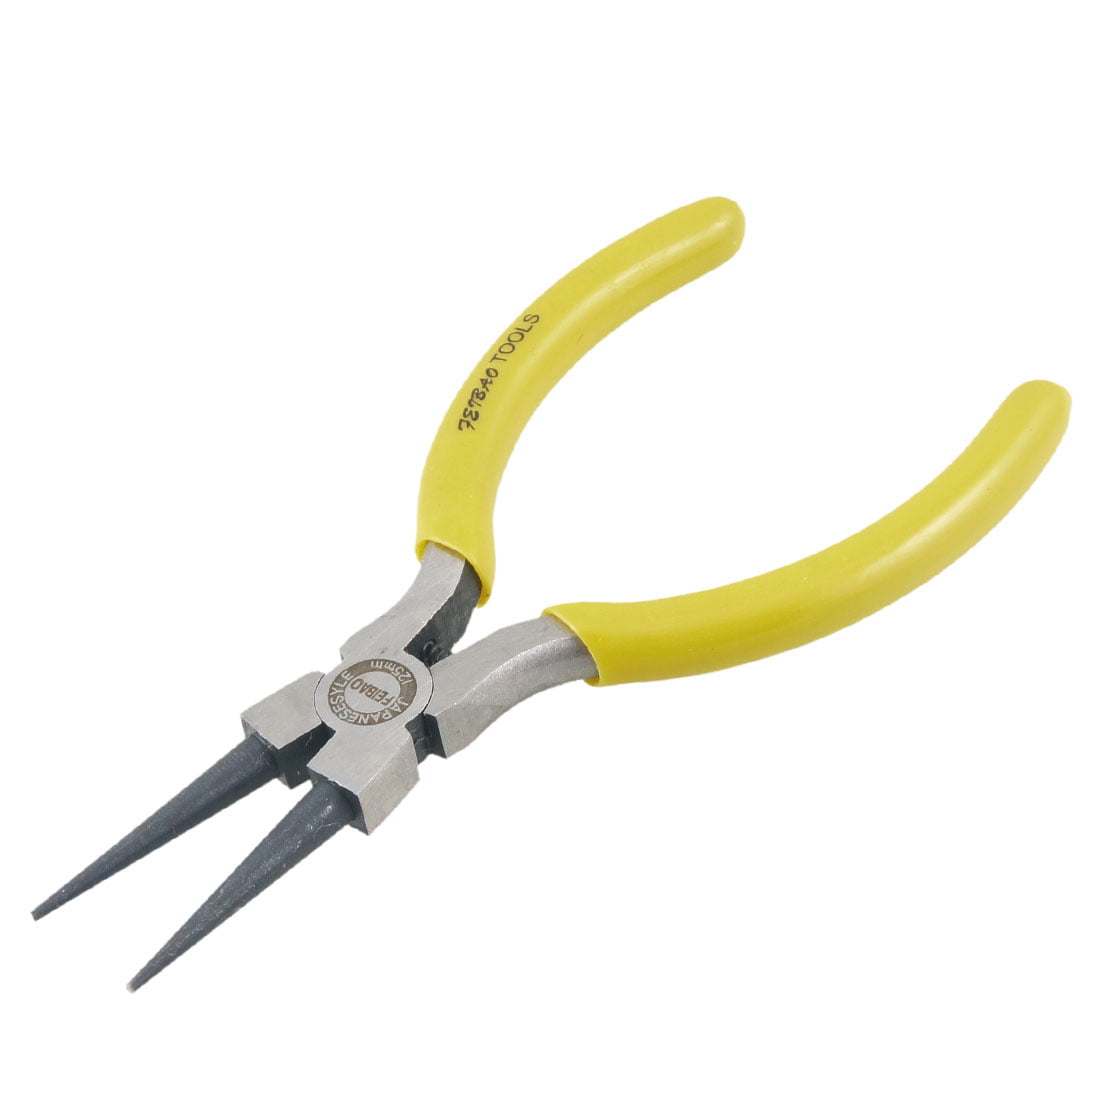 Unique Bargains Yellow Plastic Coated Curved Handle Needle Nose Pliers Hand Tool 5